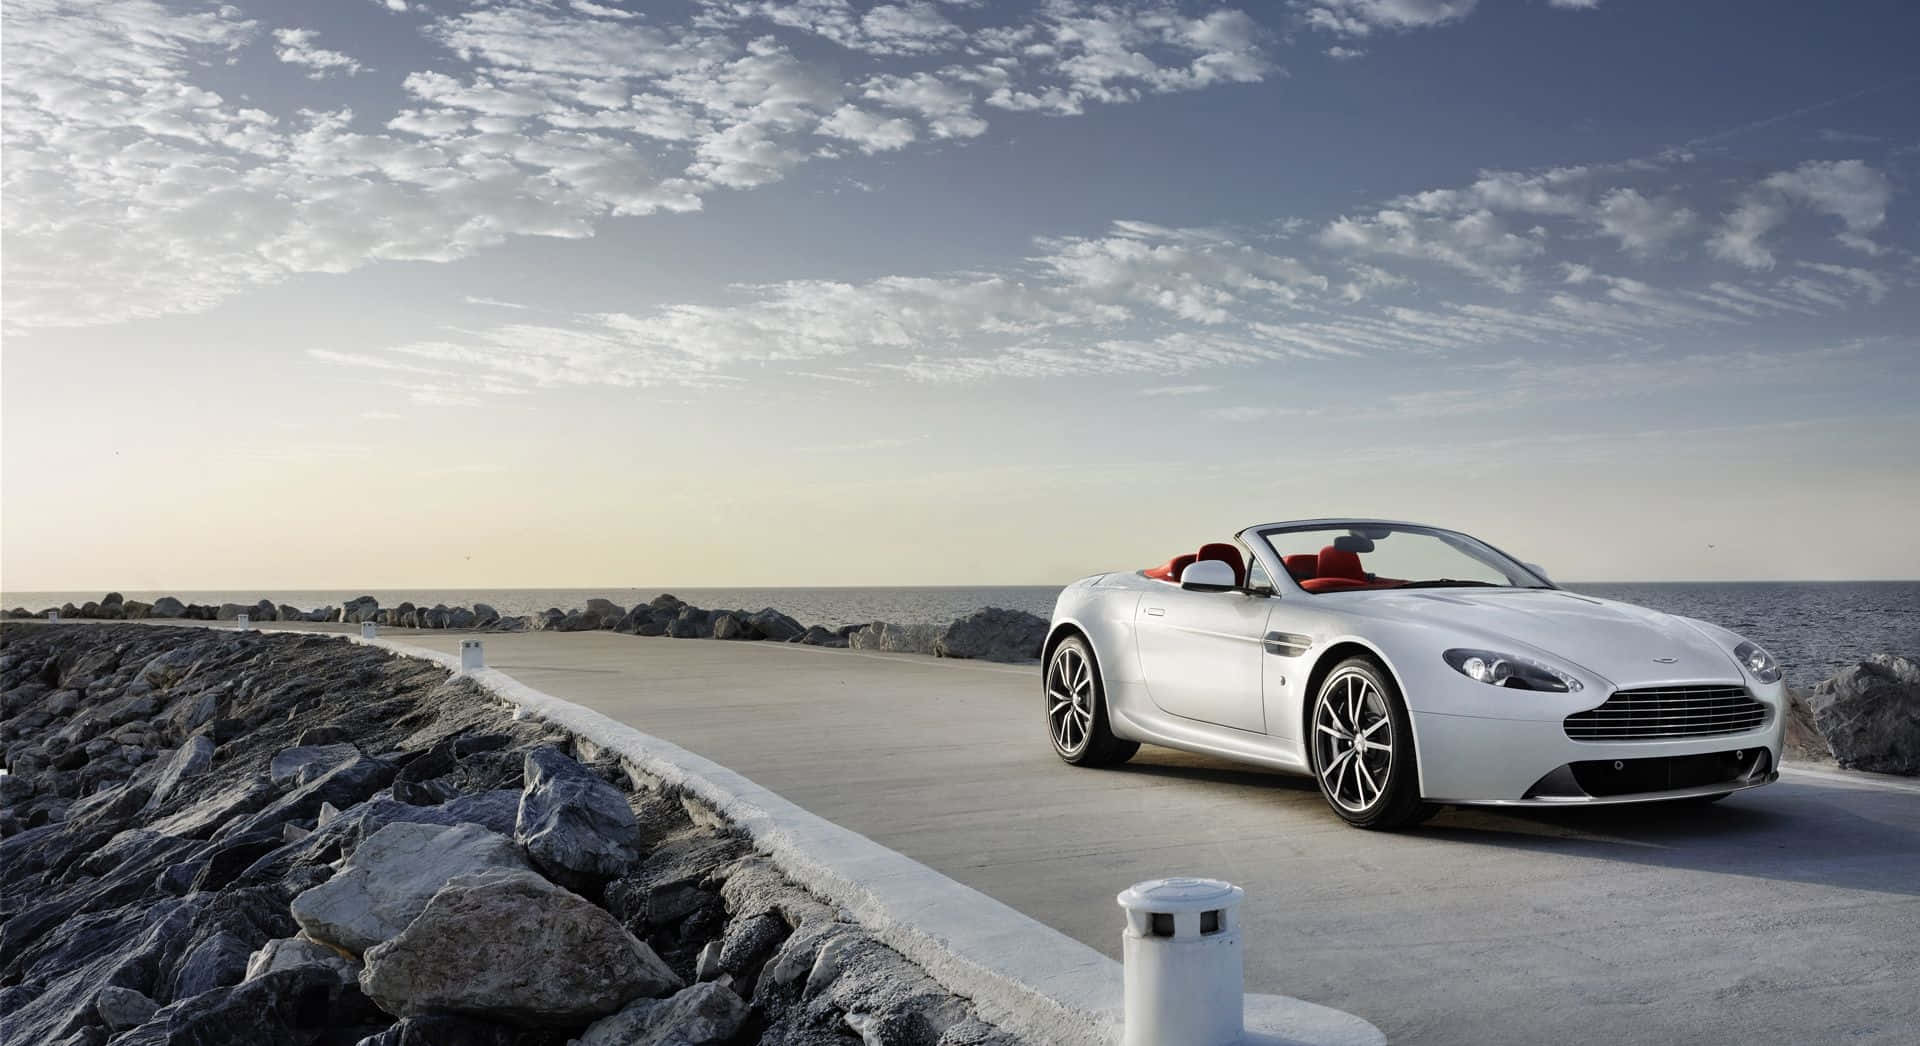 Experience the Power and Luxury of the Aston Martin V12 Vantage Wallpaper